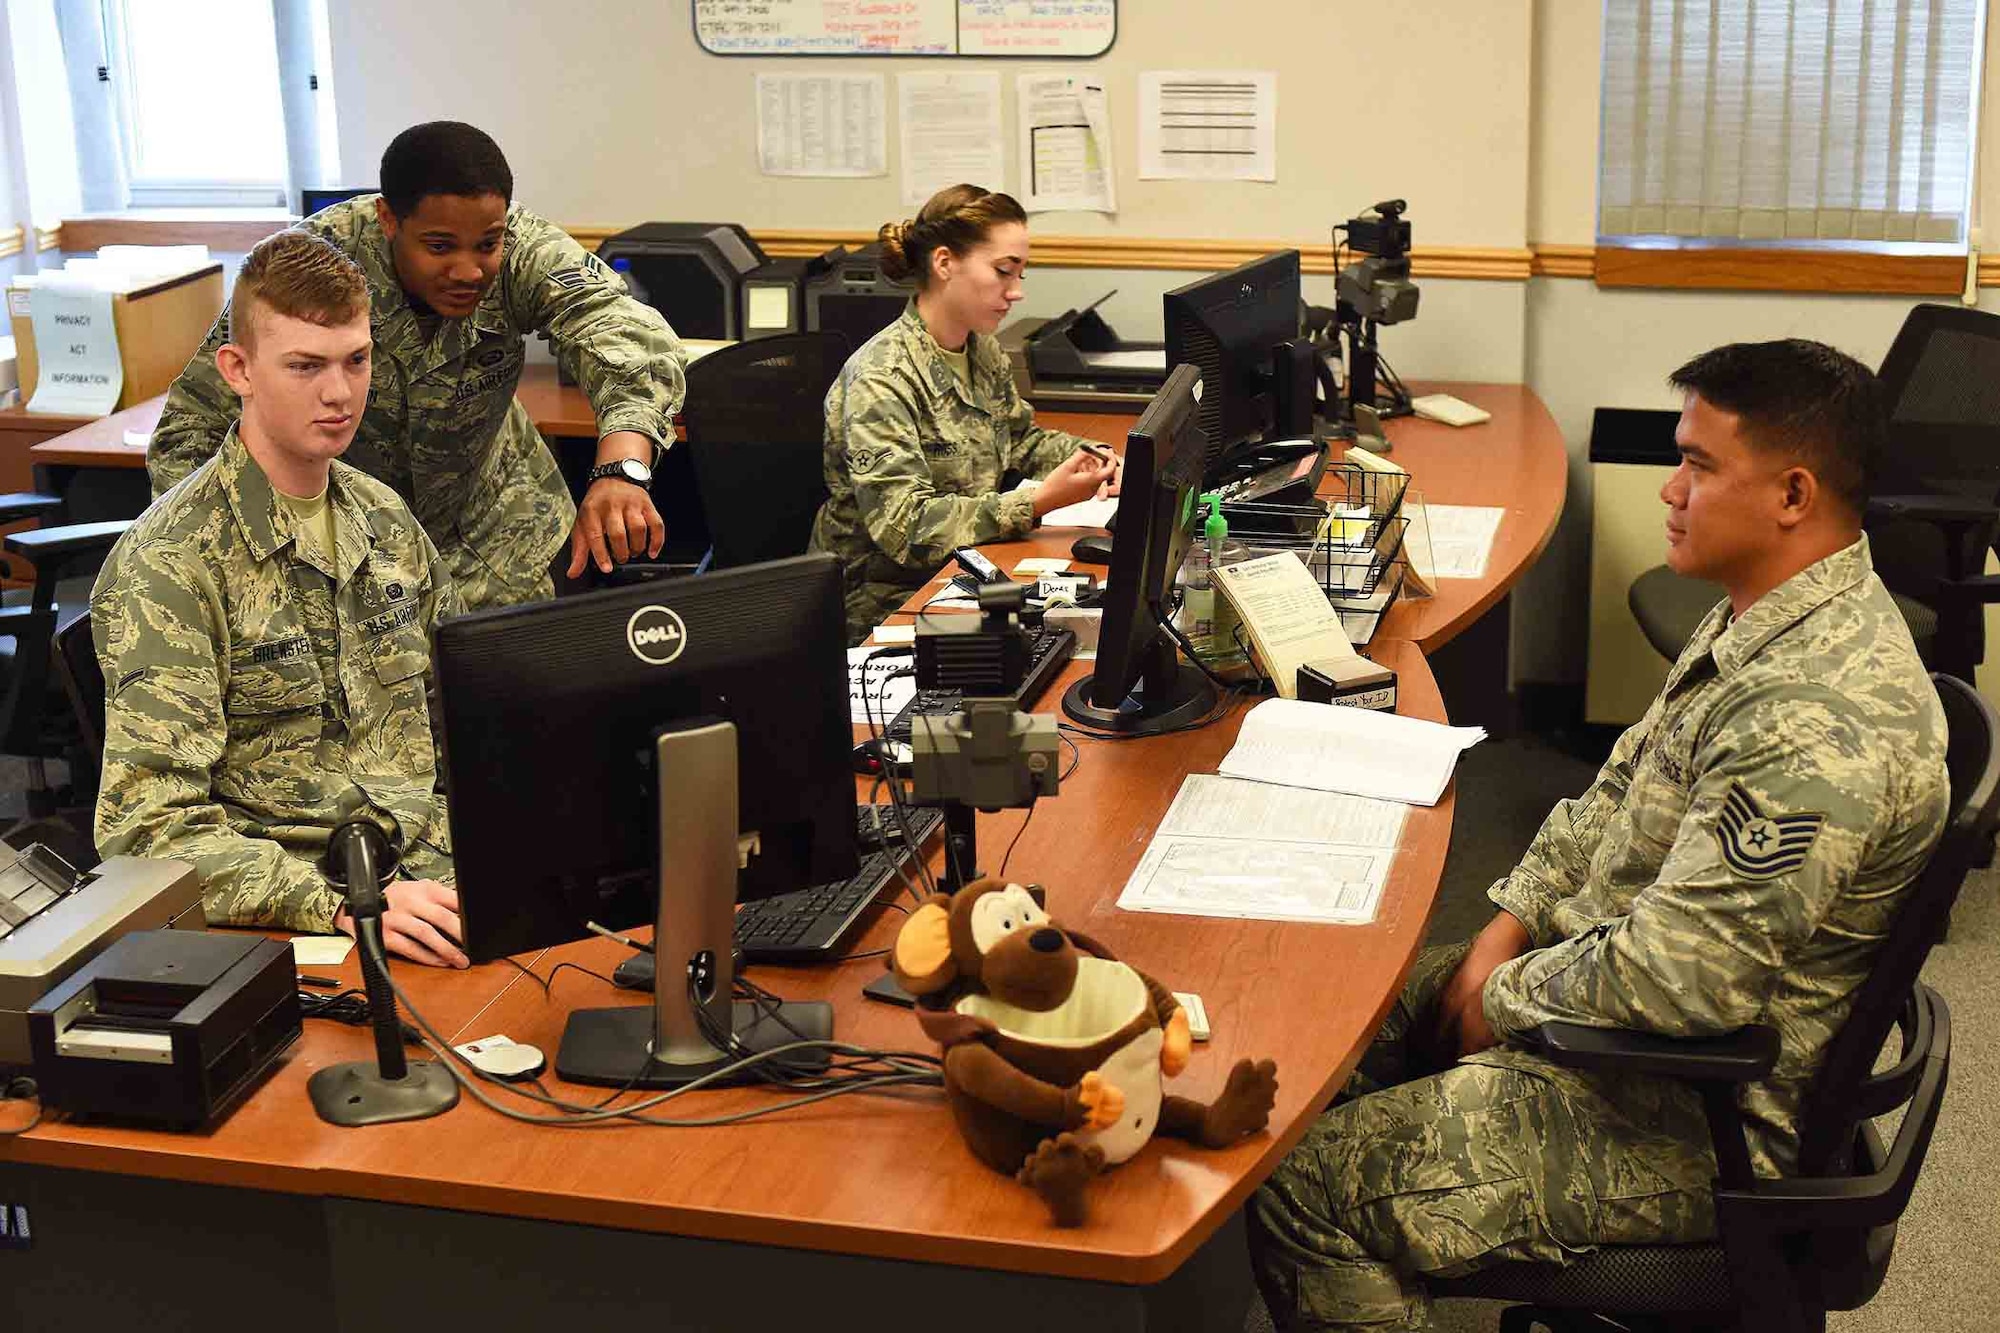 Airmen assigned to the 341st Force Support Squadron customer service section assist a service member July 20, 2016, at Malmstrom Air Force Base, Mont. Customer service is part of the 341st FSS military personnel section, which won a 2015 A1 Award at the Air Force level for outstanding contributions and commitment to excellence in serving Airmen and their families. (U.S. Air Force photo/Amn Collin Schmidt)